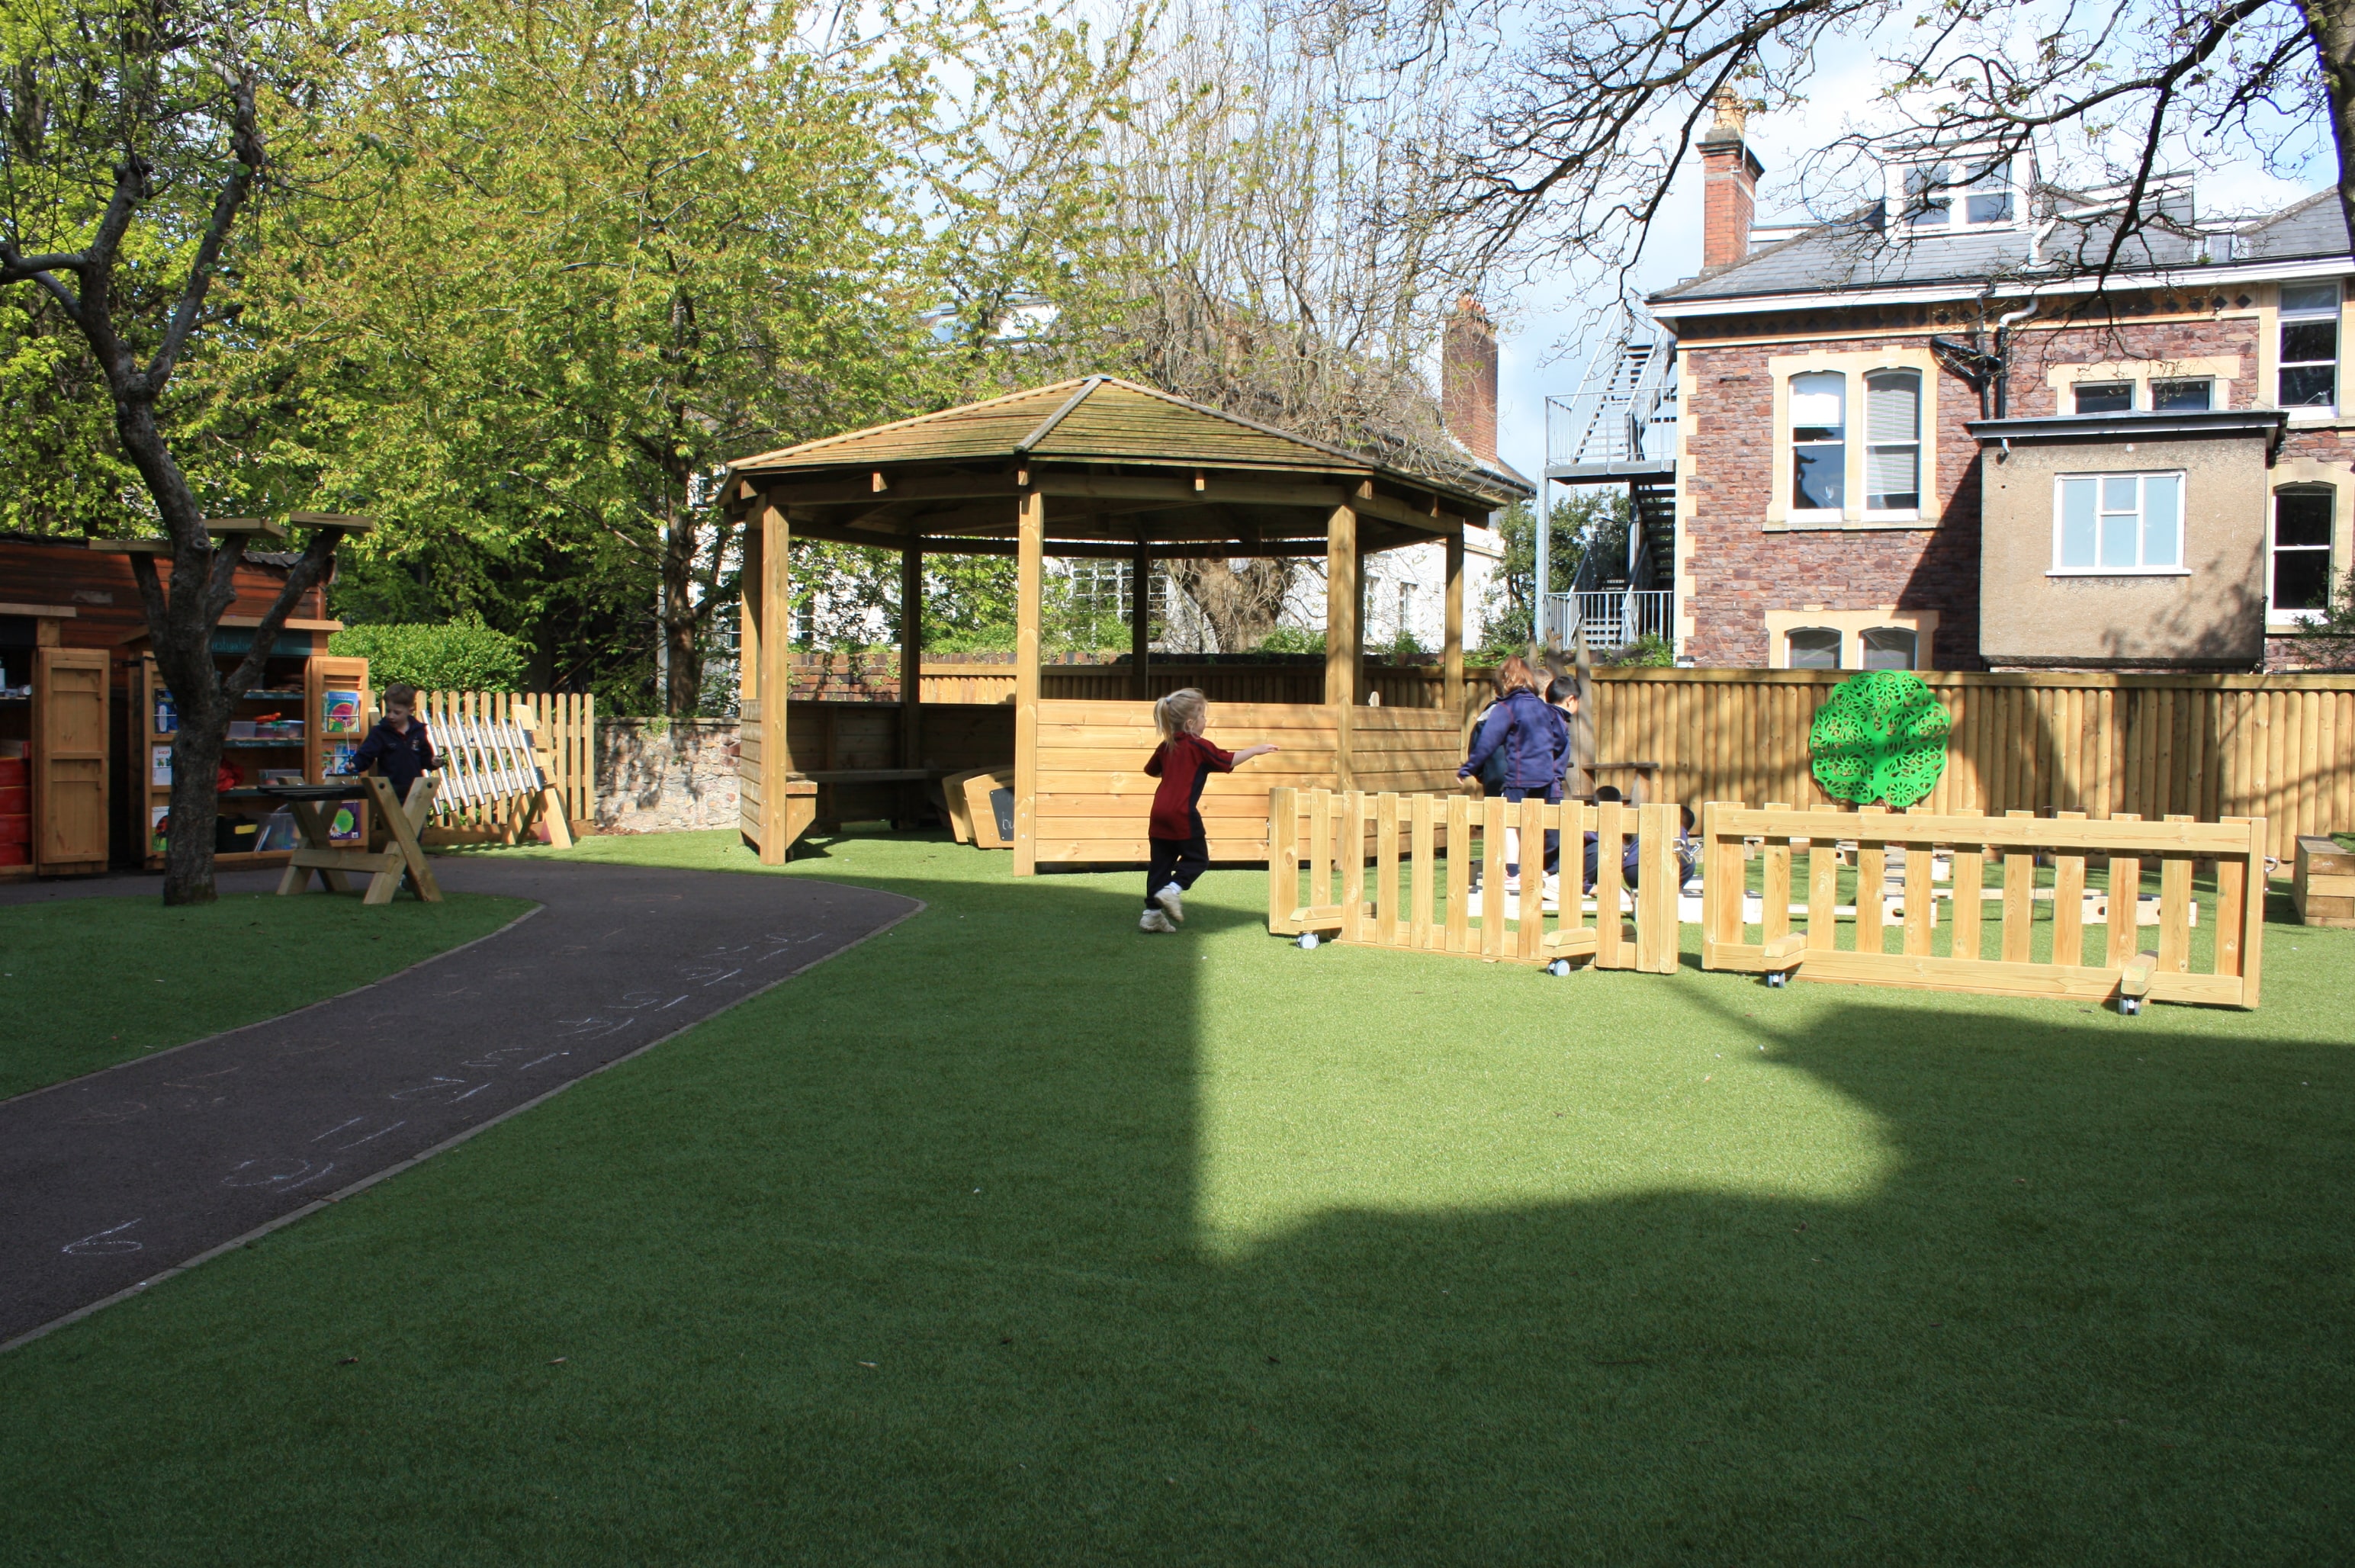 An artificial grass playground with a tarmac path on the left. A wooden canopy can be seen with 6 children to the right playing in a fenced off area. The fences are on wheels, allowing them to be moved,